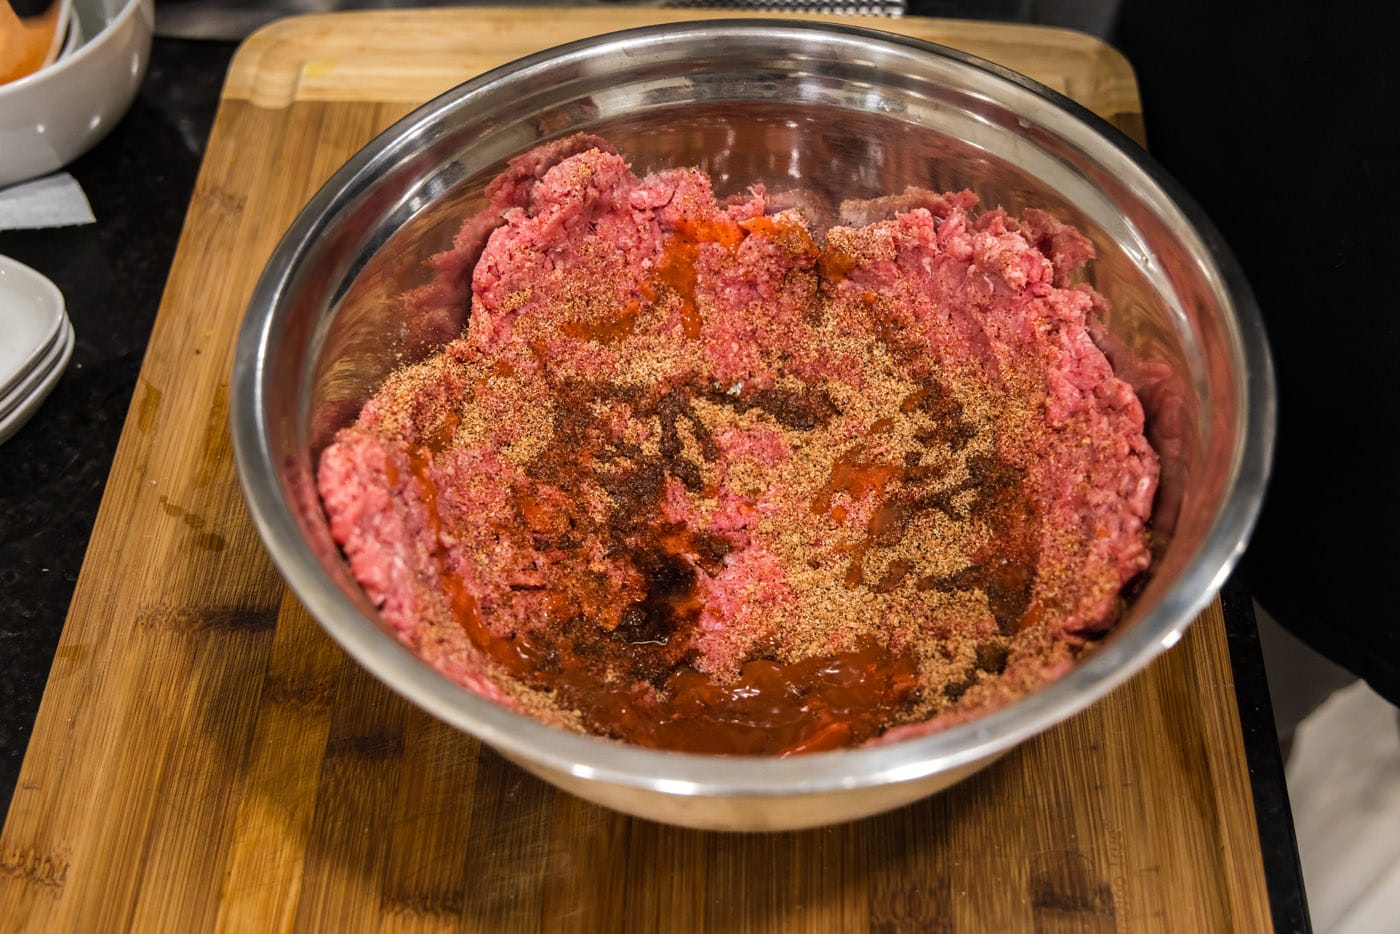 mixing burger meat with seasonings in a bowl